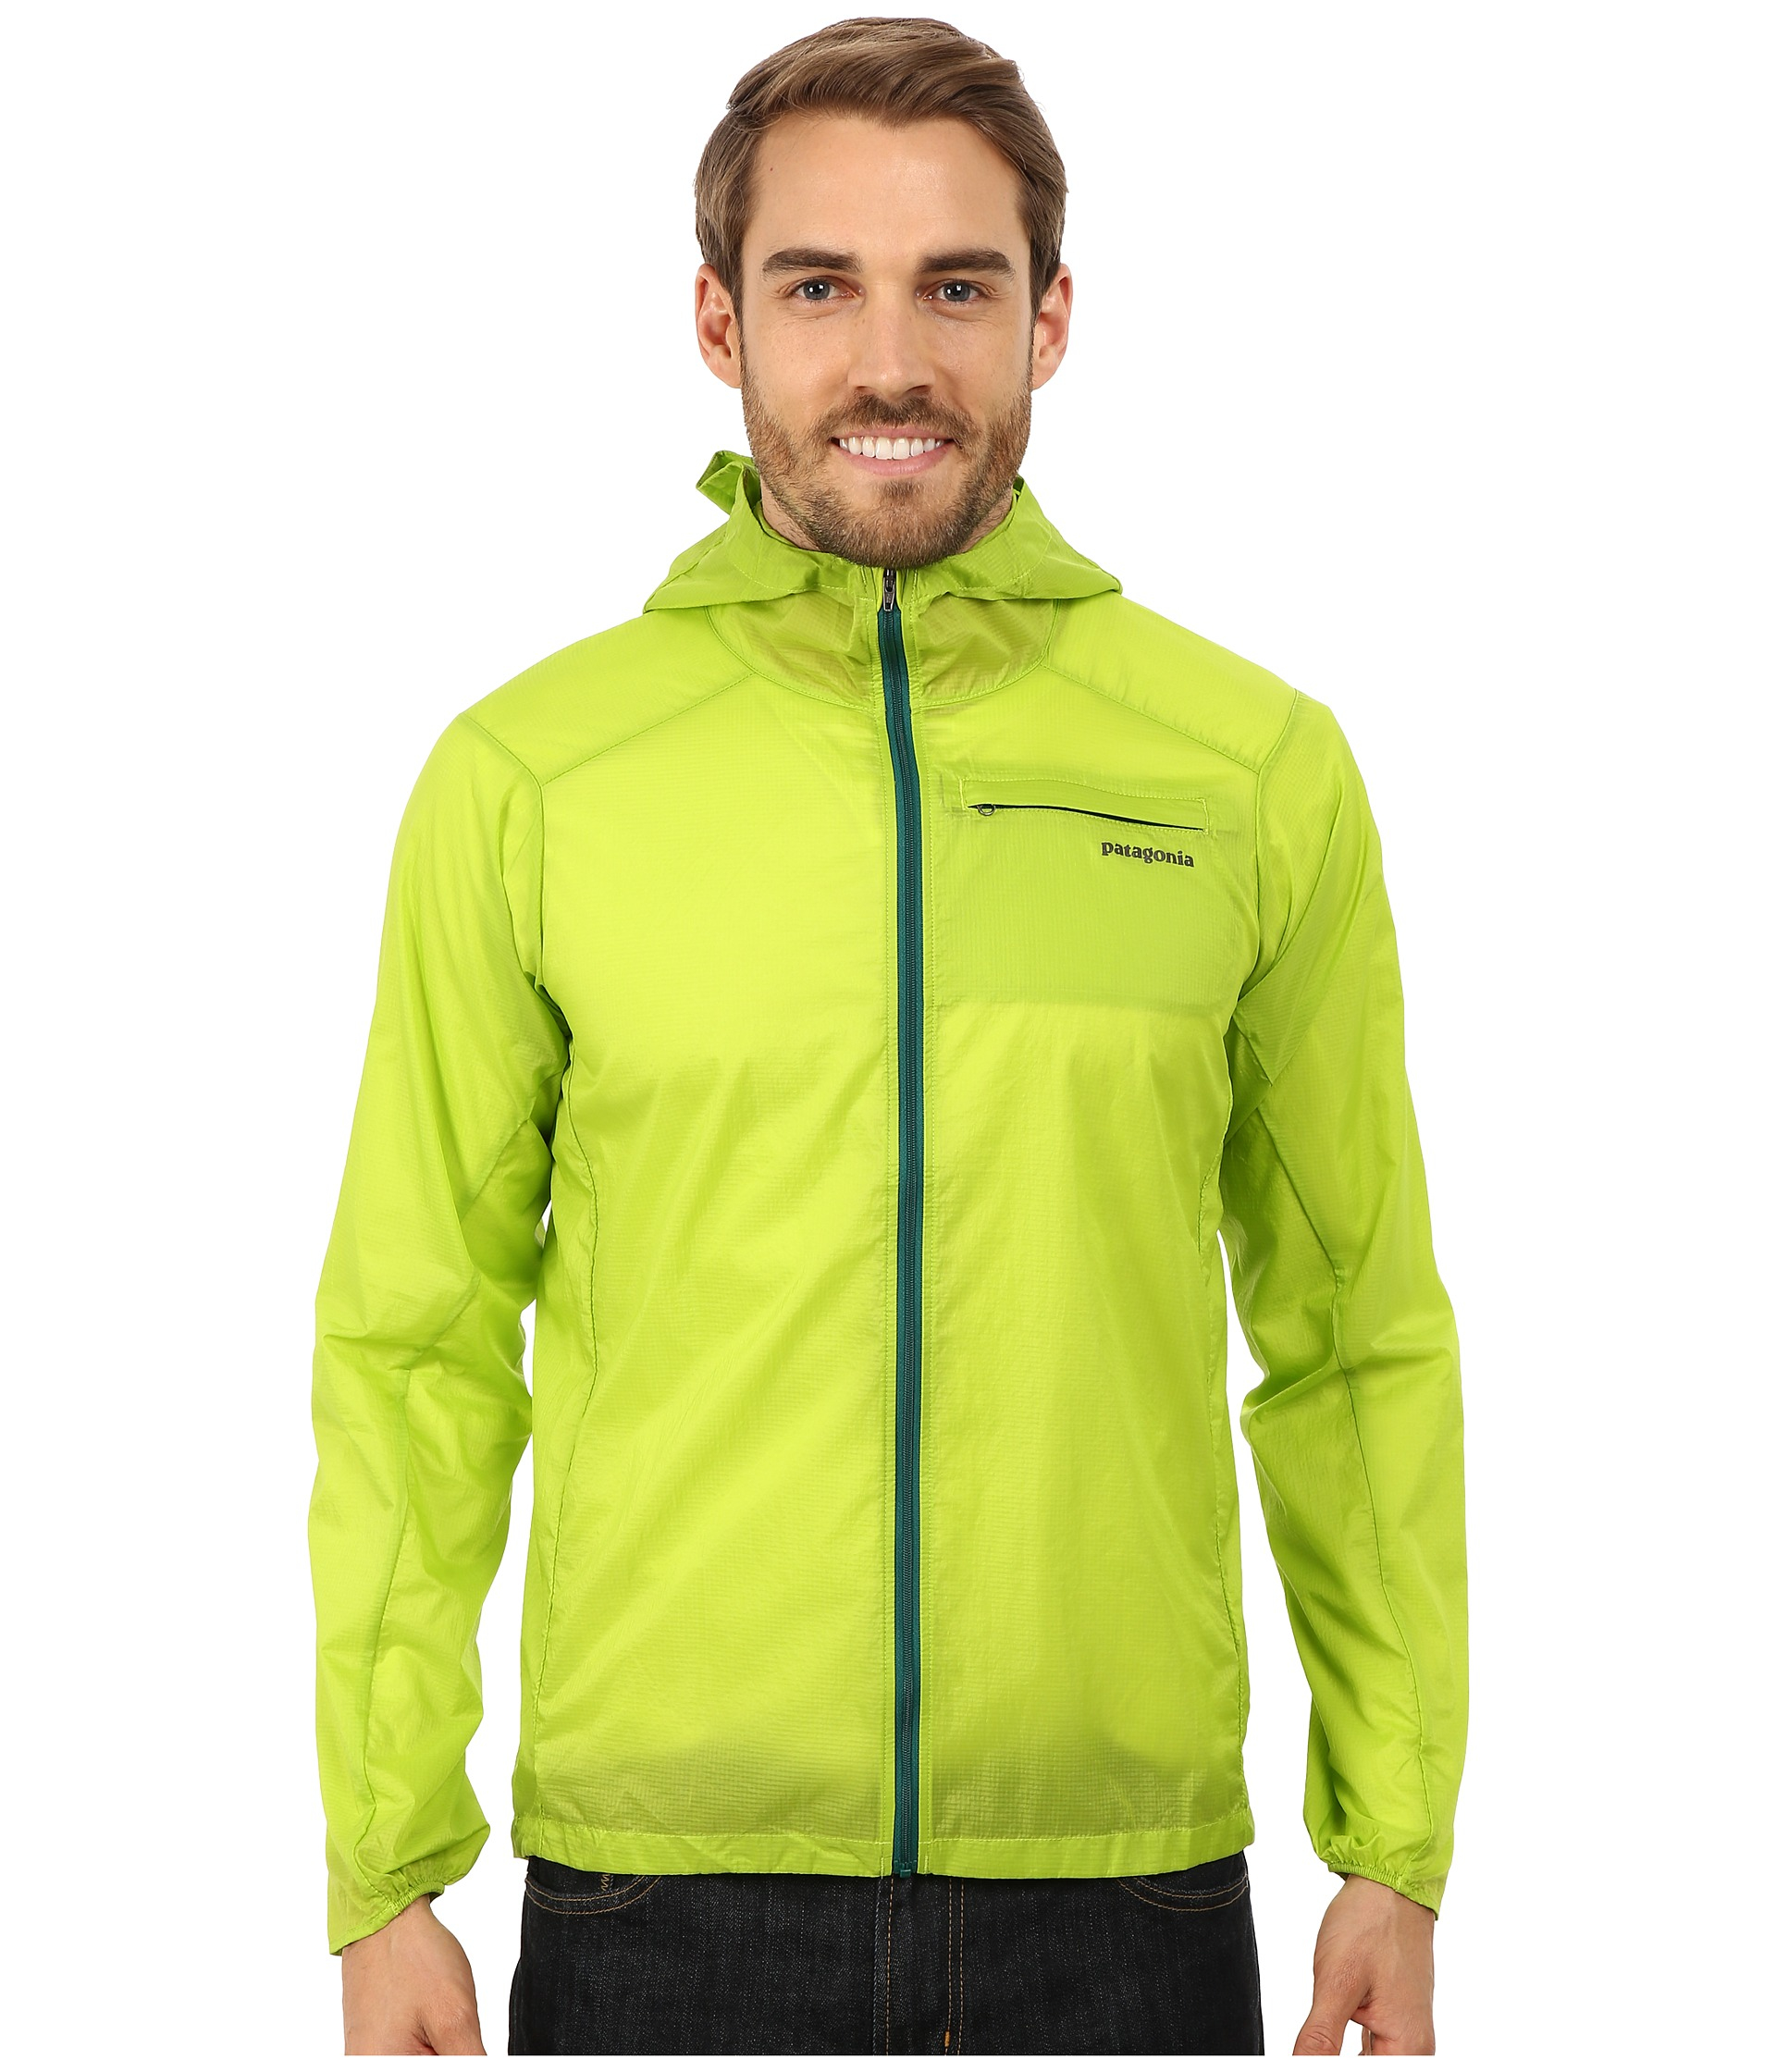 Patagonia Houdini® Jacket in Green for Men - Lyst